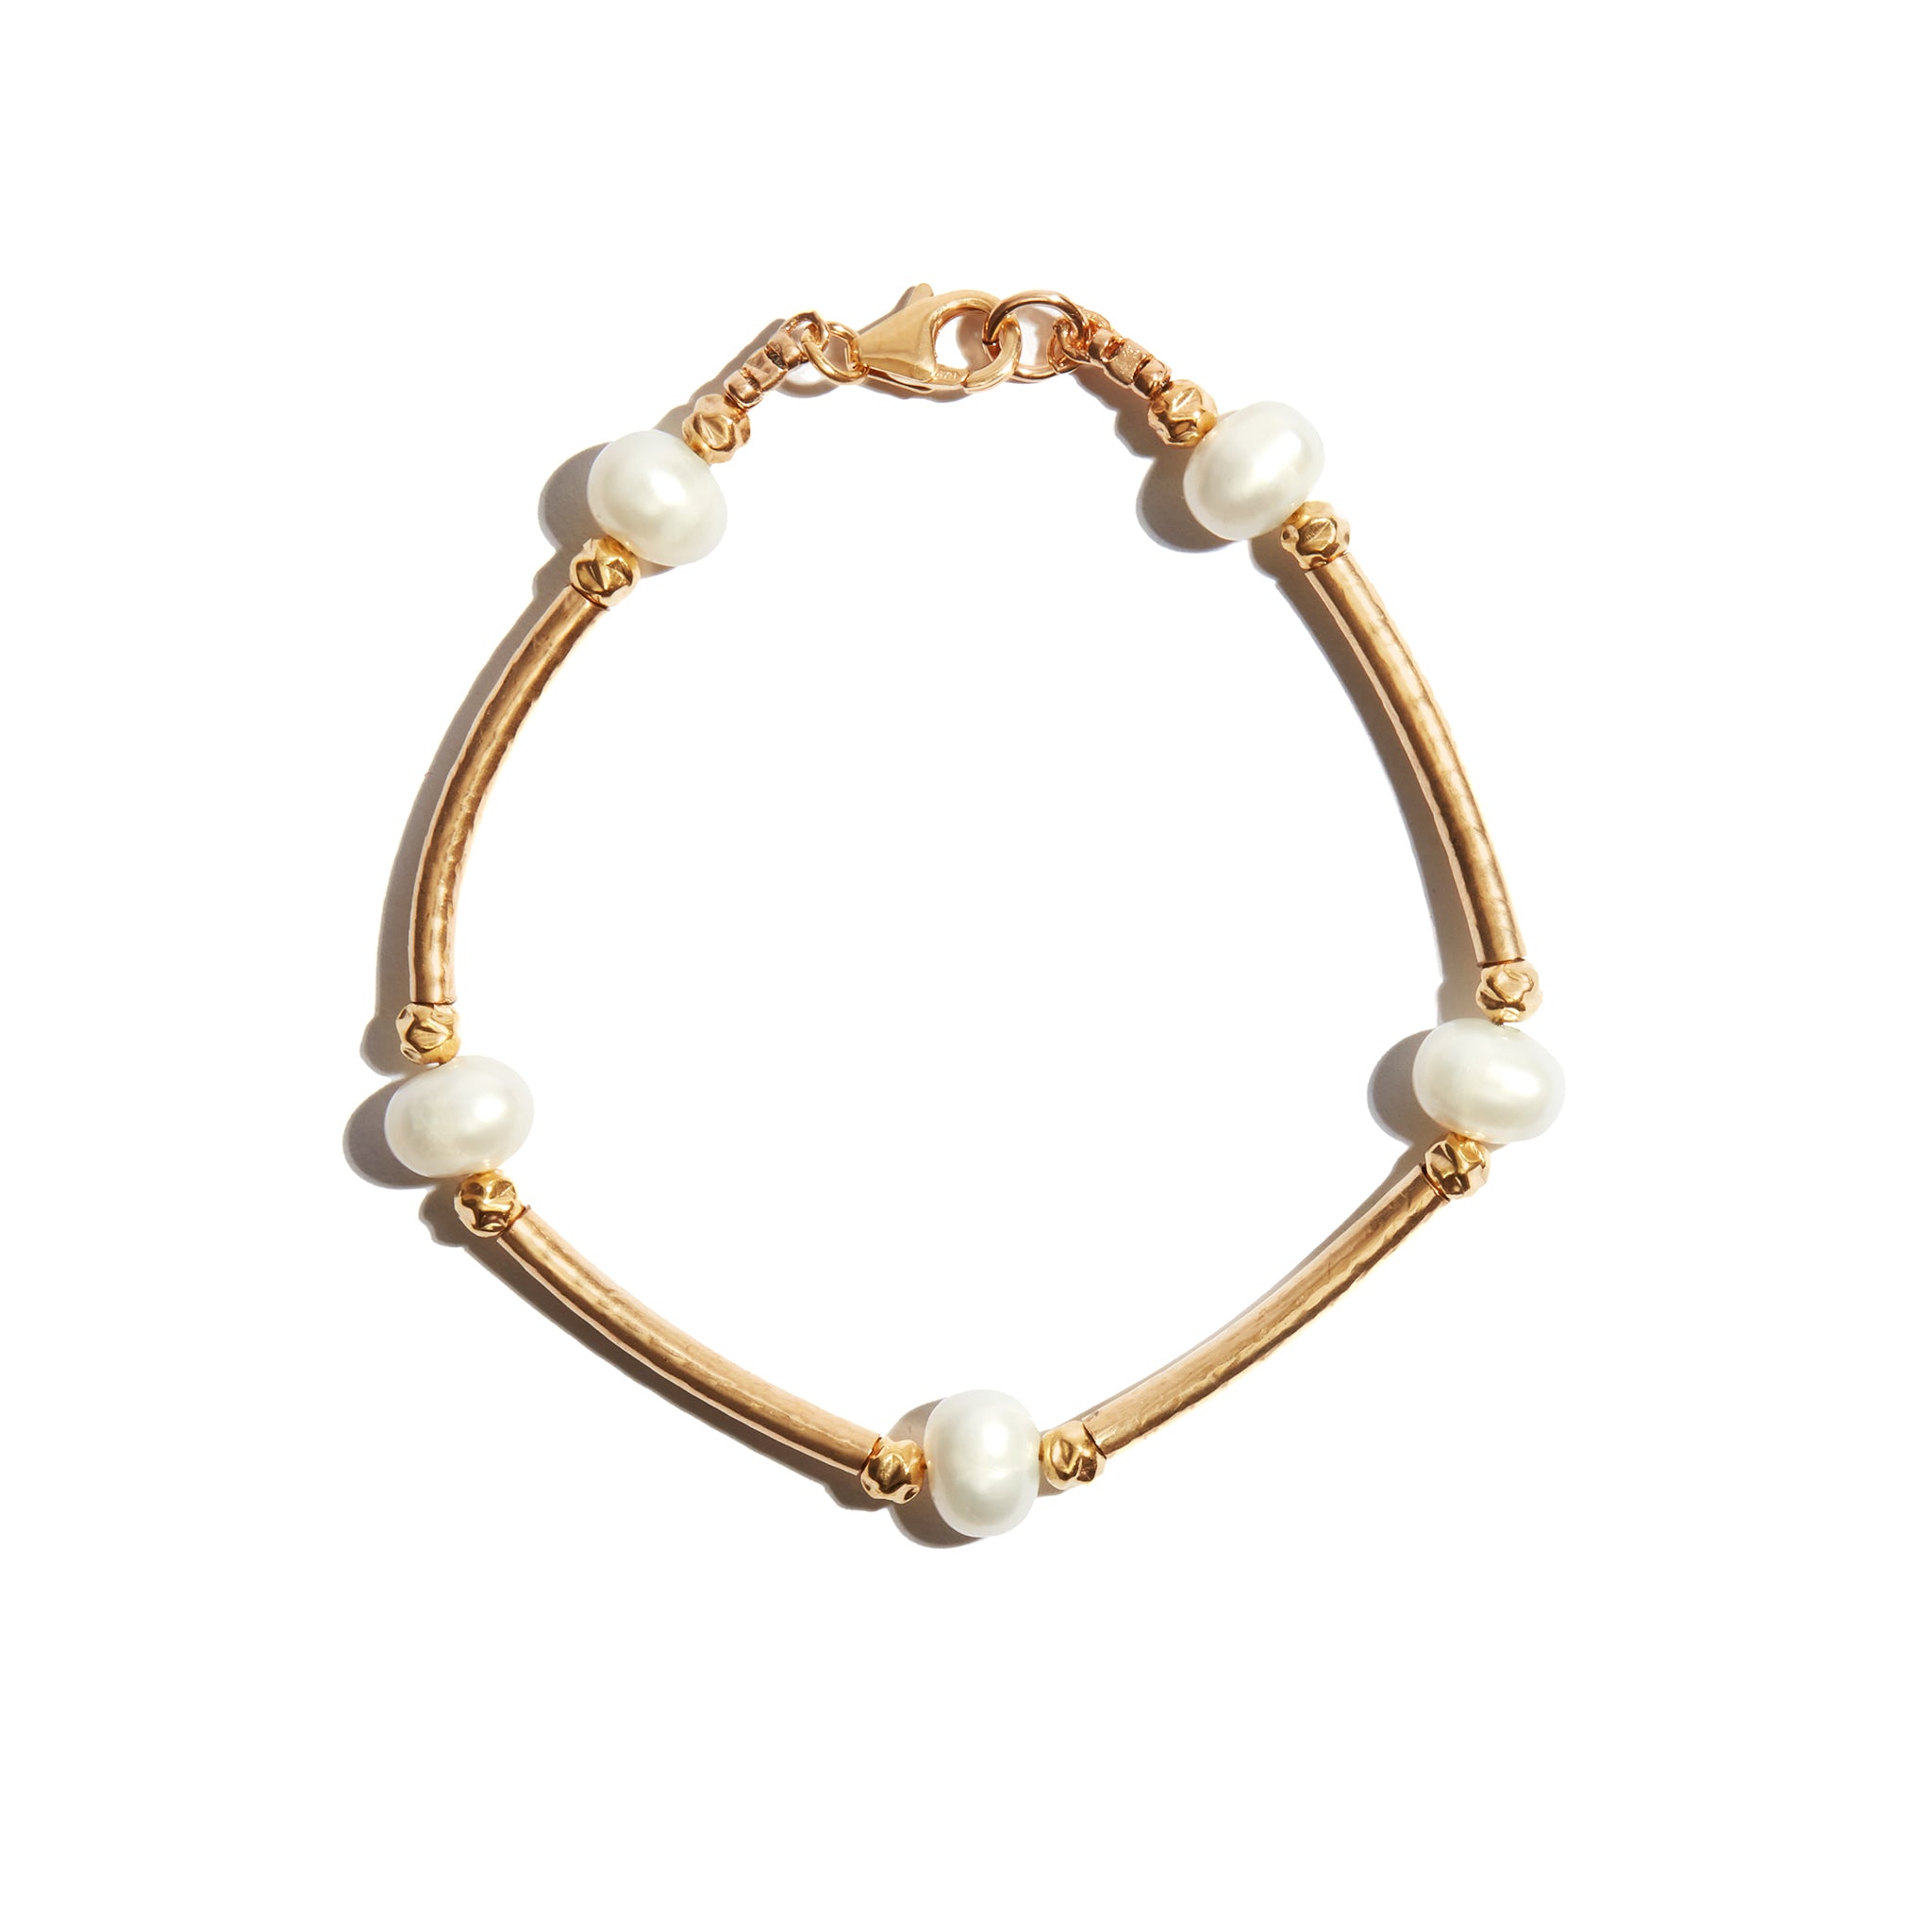 A charming pearl and tube bracelet made of 14ct gold fill, perfect for adding elegance to any outfit.